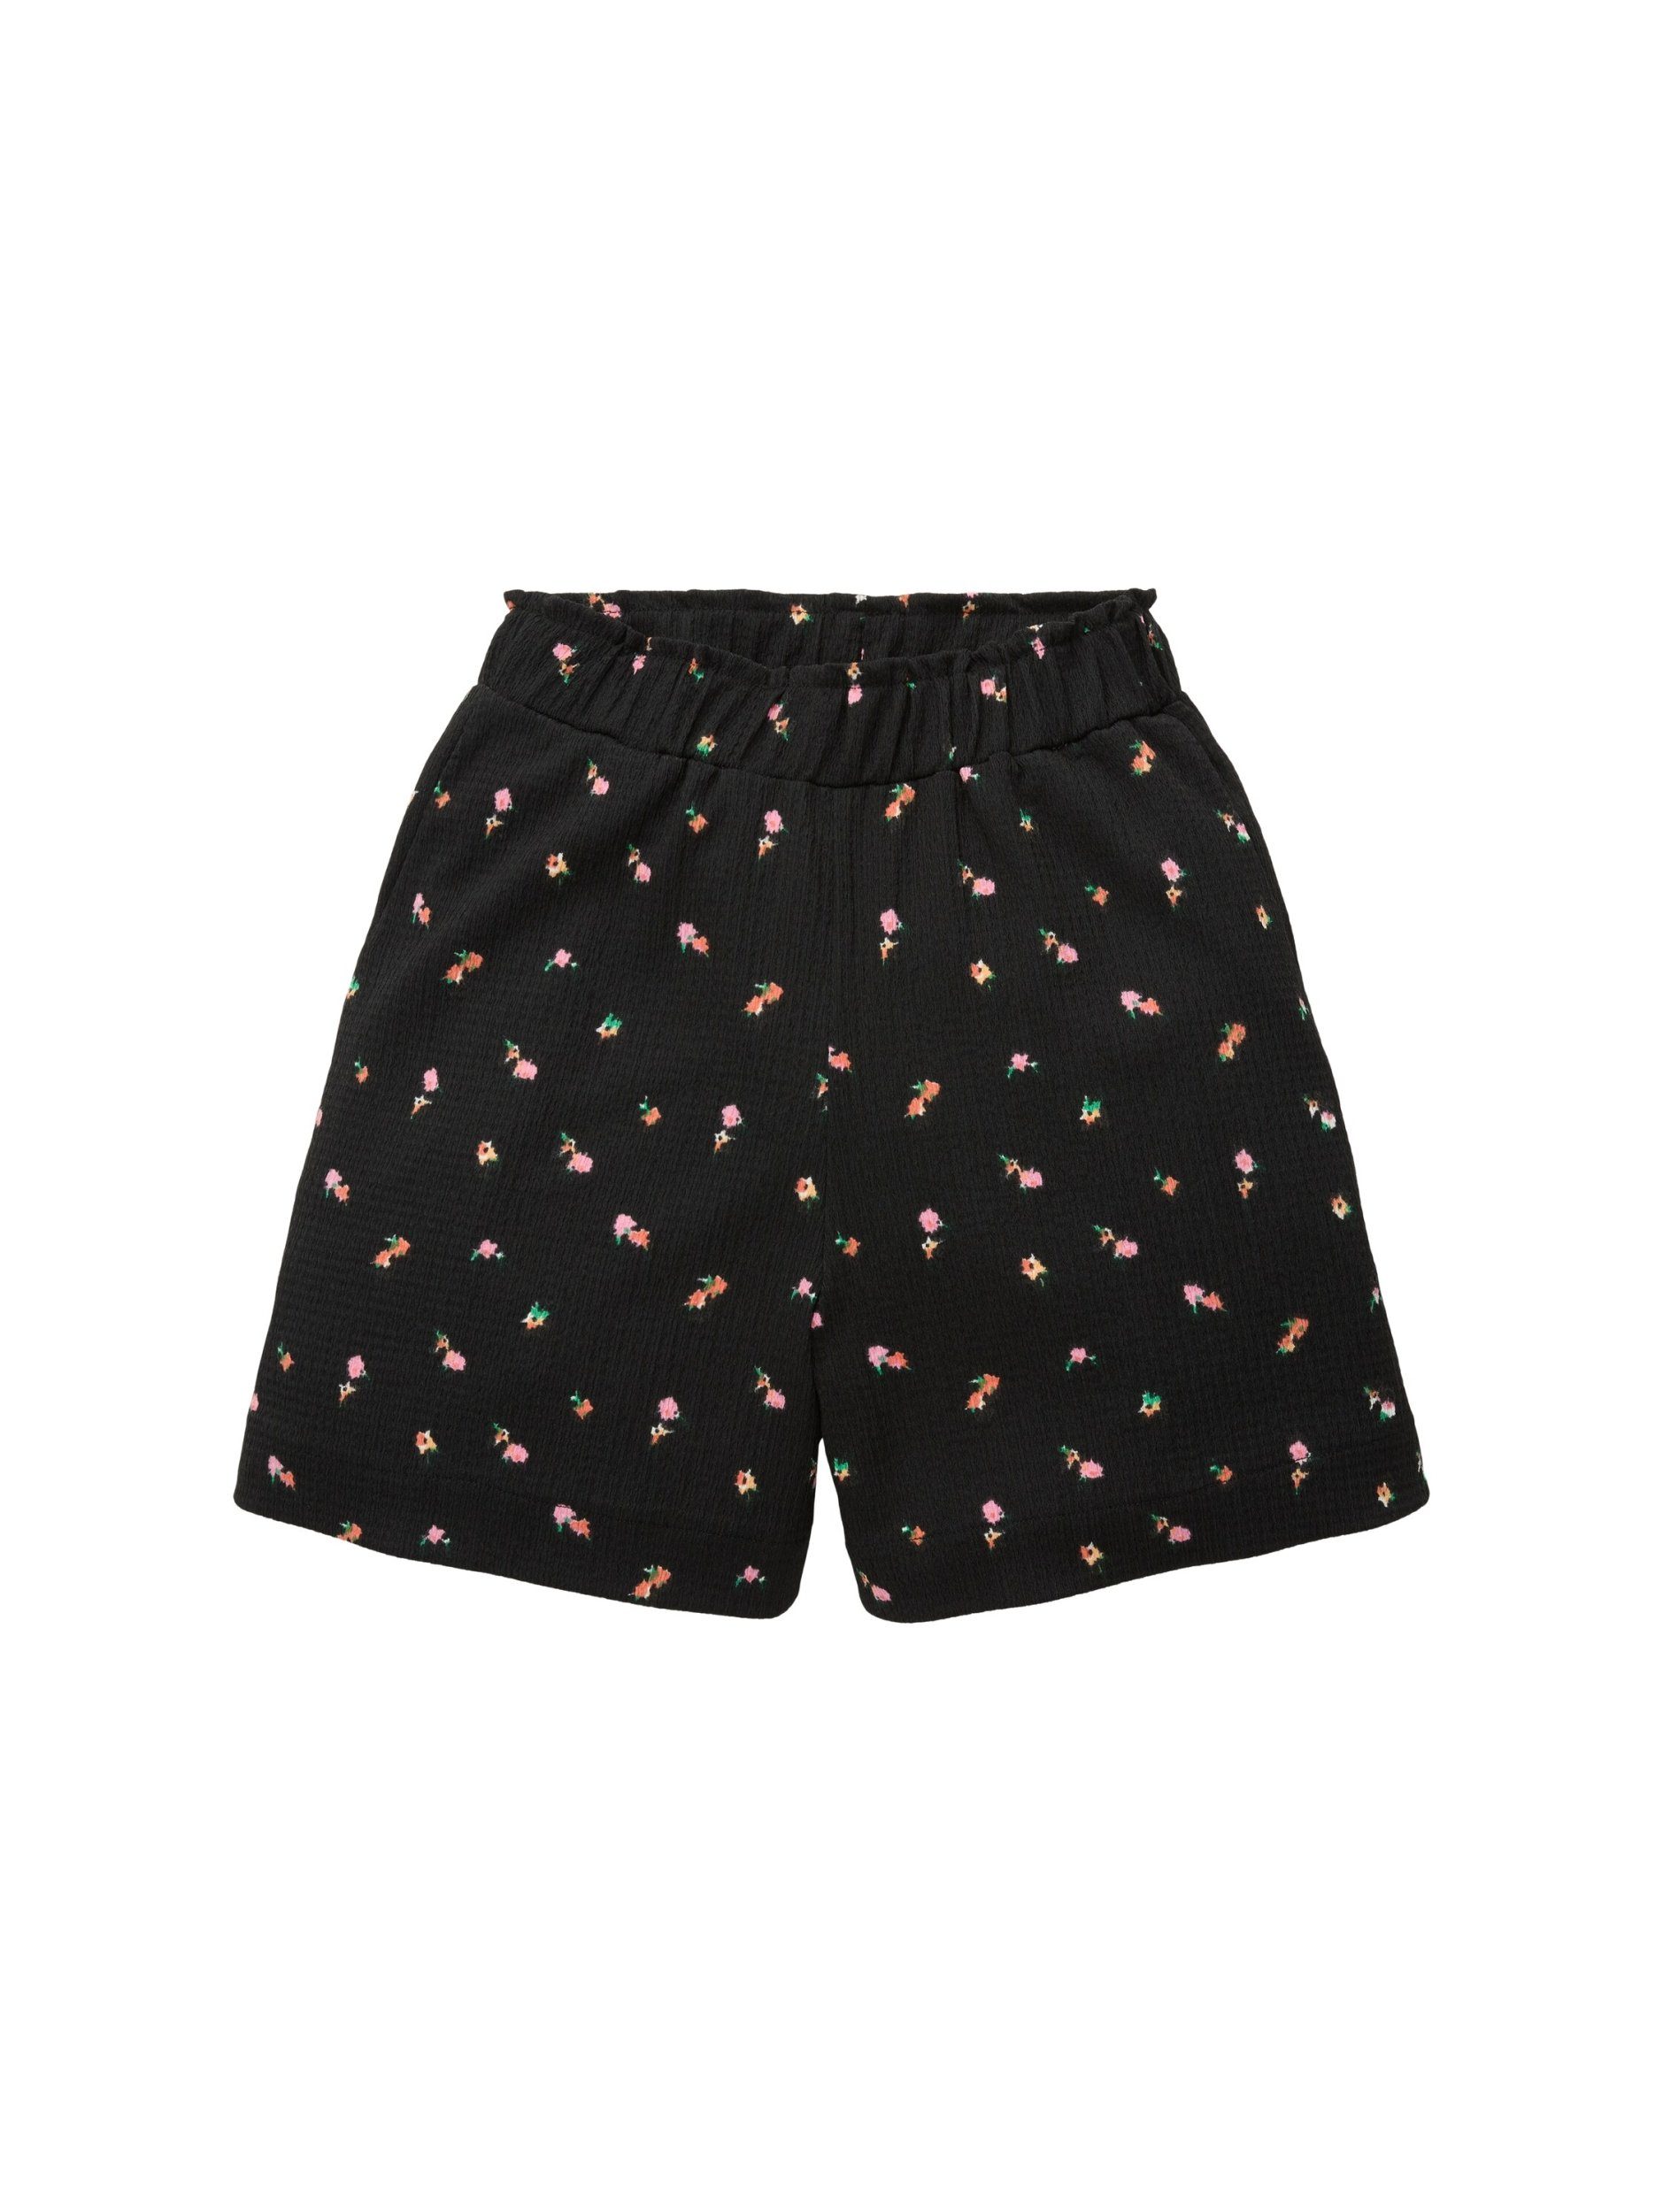 TOM TAILOR Shorts Easy structured shorts 31950 small black flower print